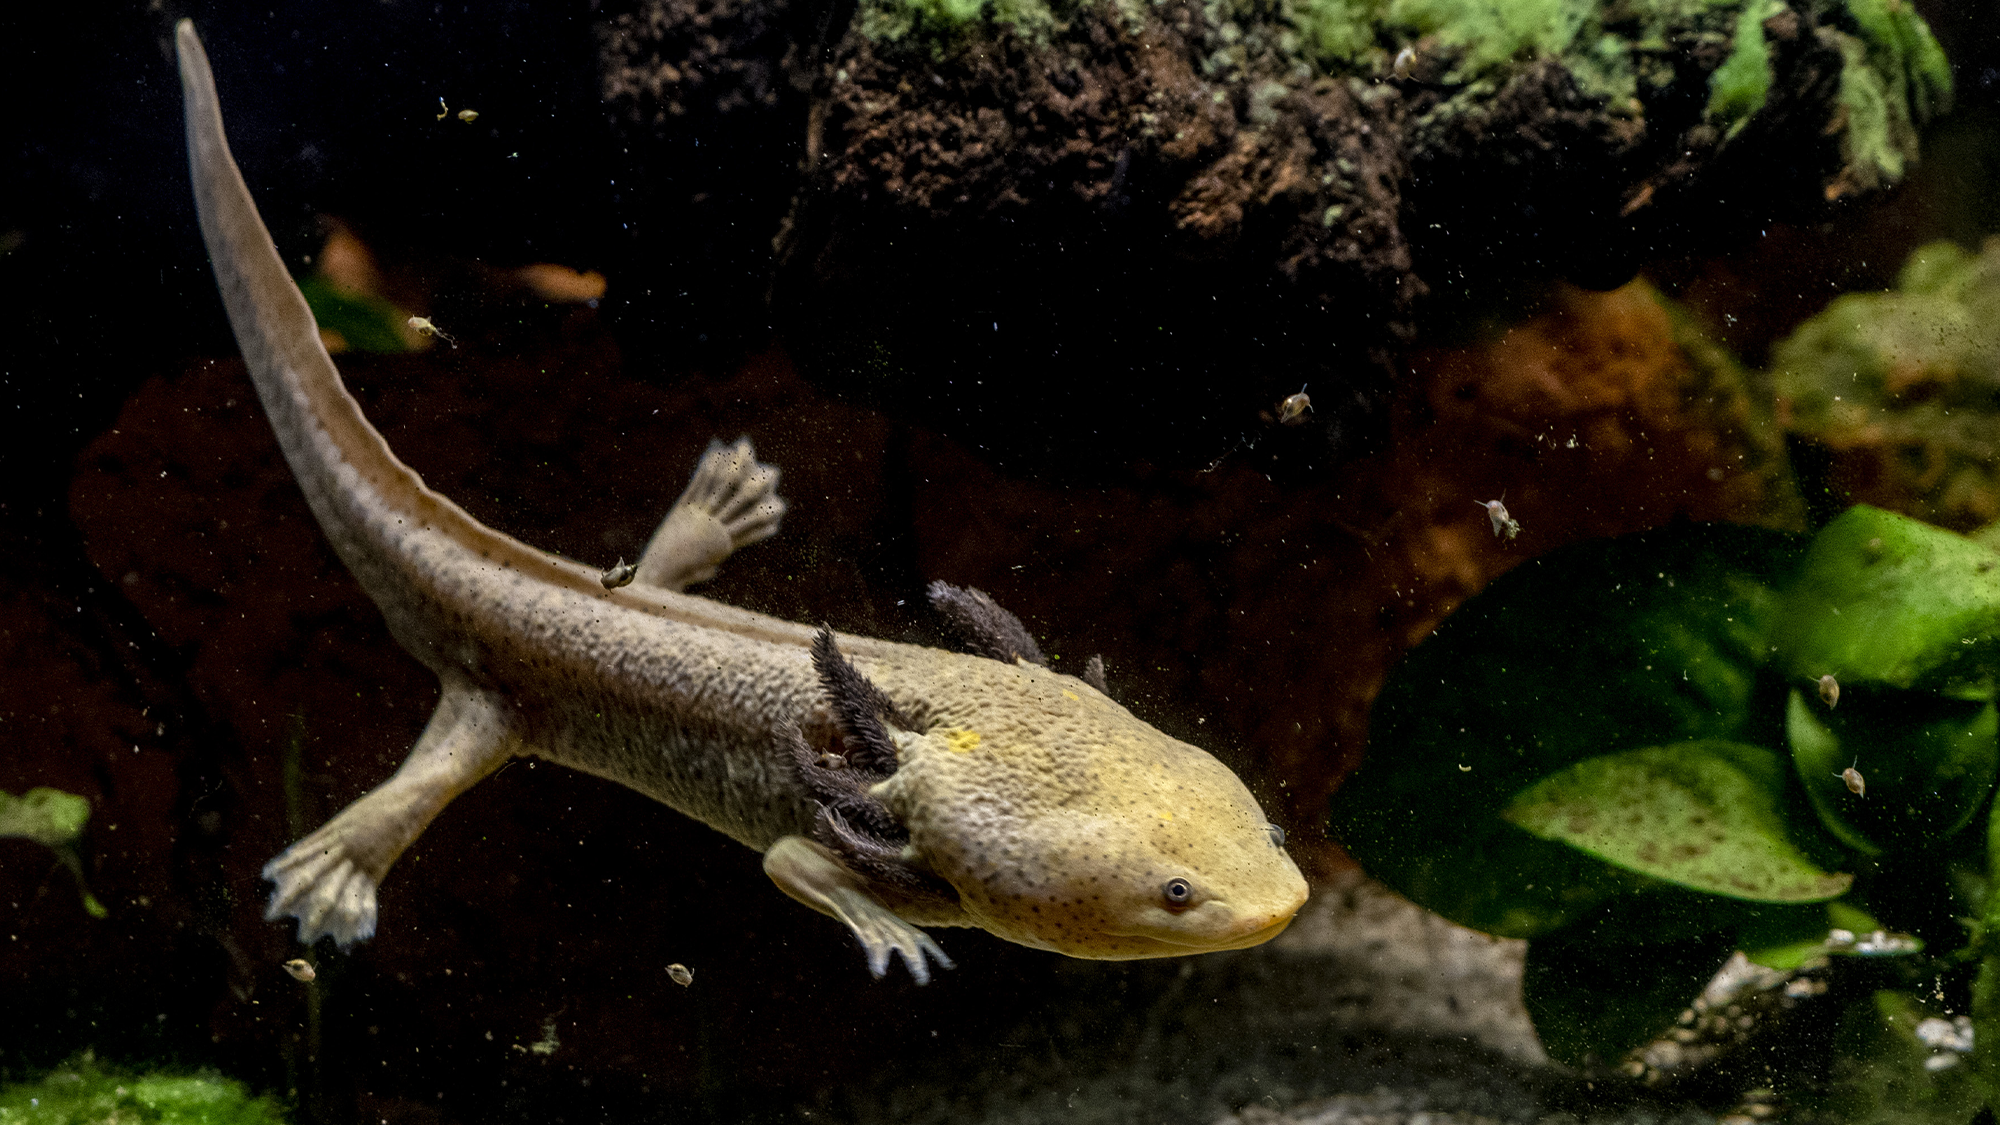 A yellow-ish axolotl swimming in a tank. Axolotls have feathery external gills on each side of their heads. Adult axolotls do have lungs like many other amphibians, but they primarily rely on their signature gills to breathe.